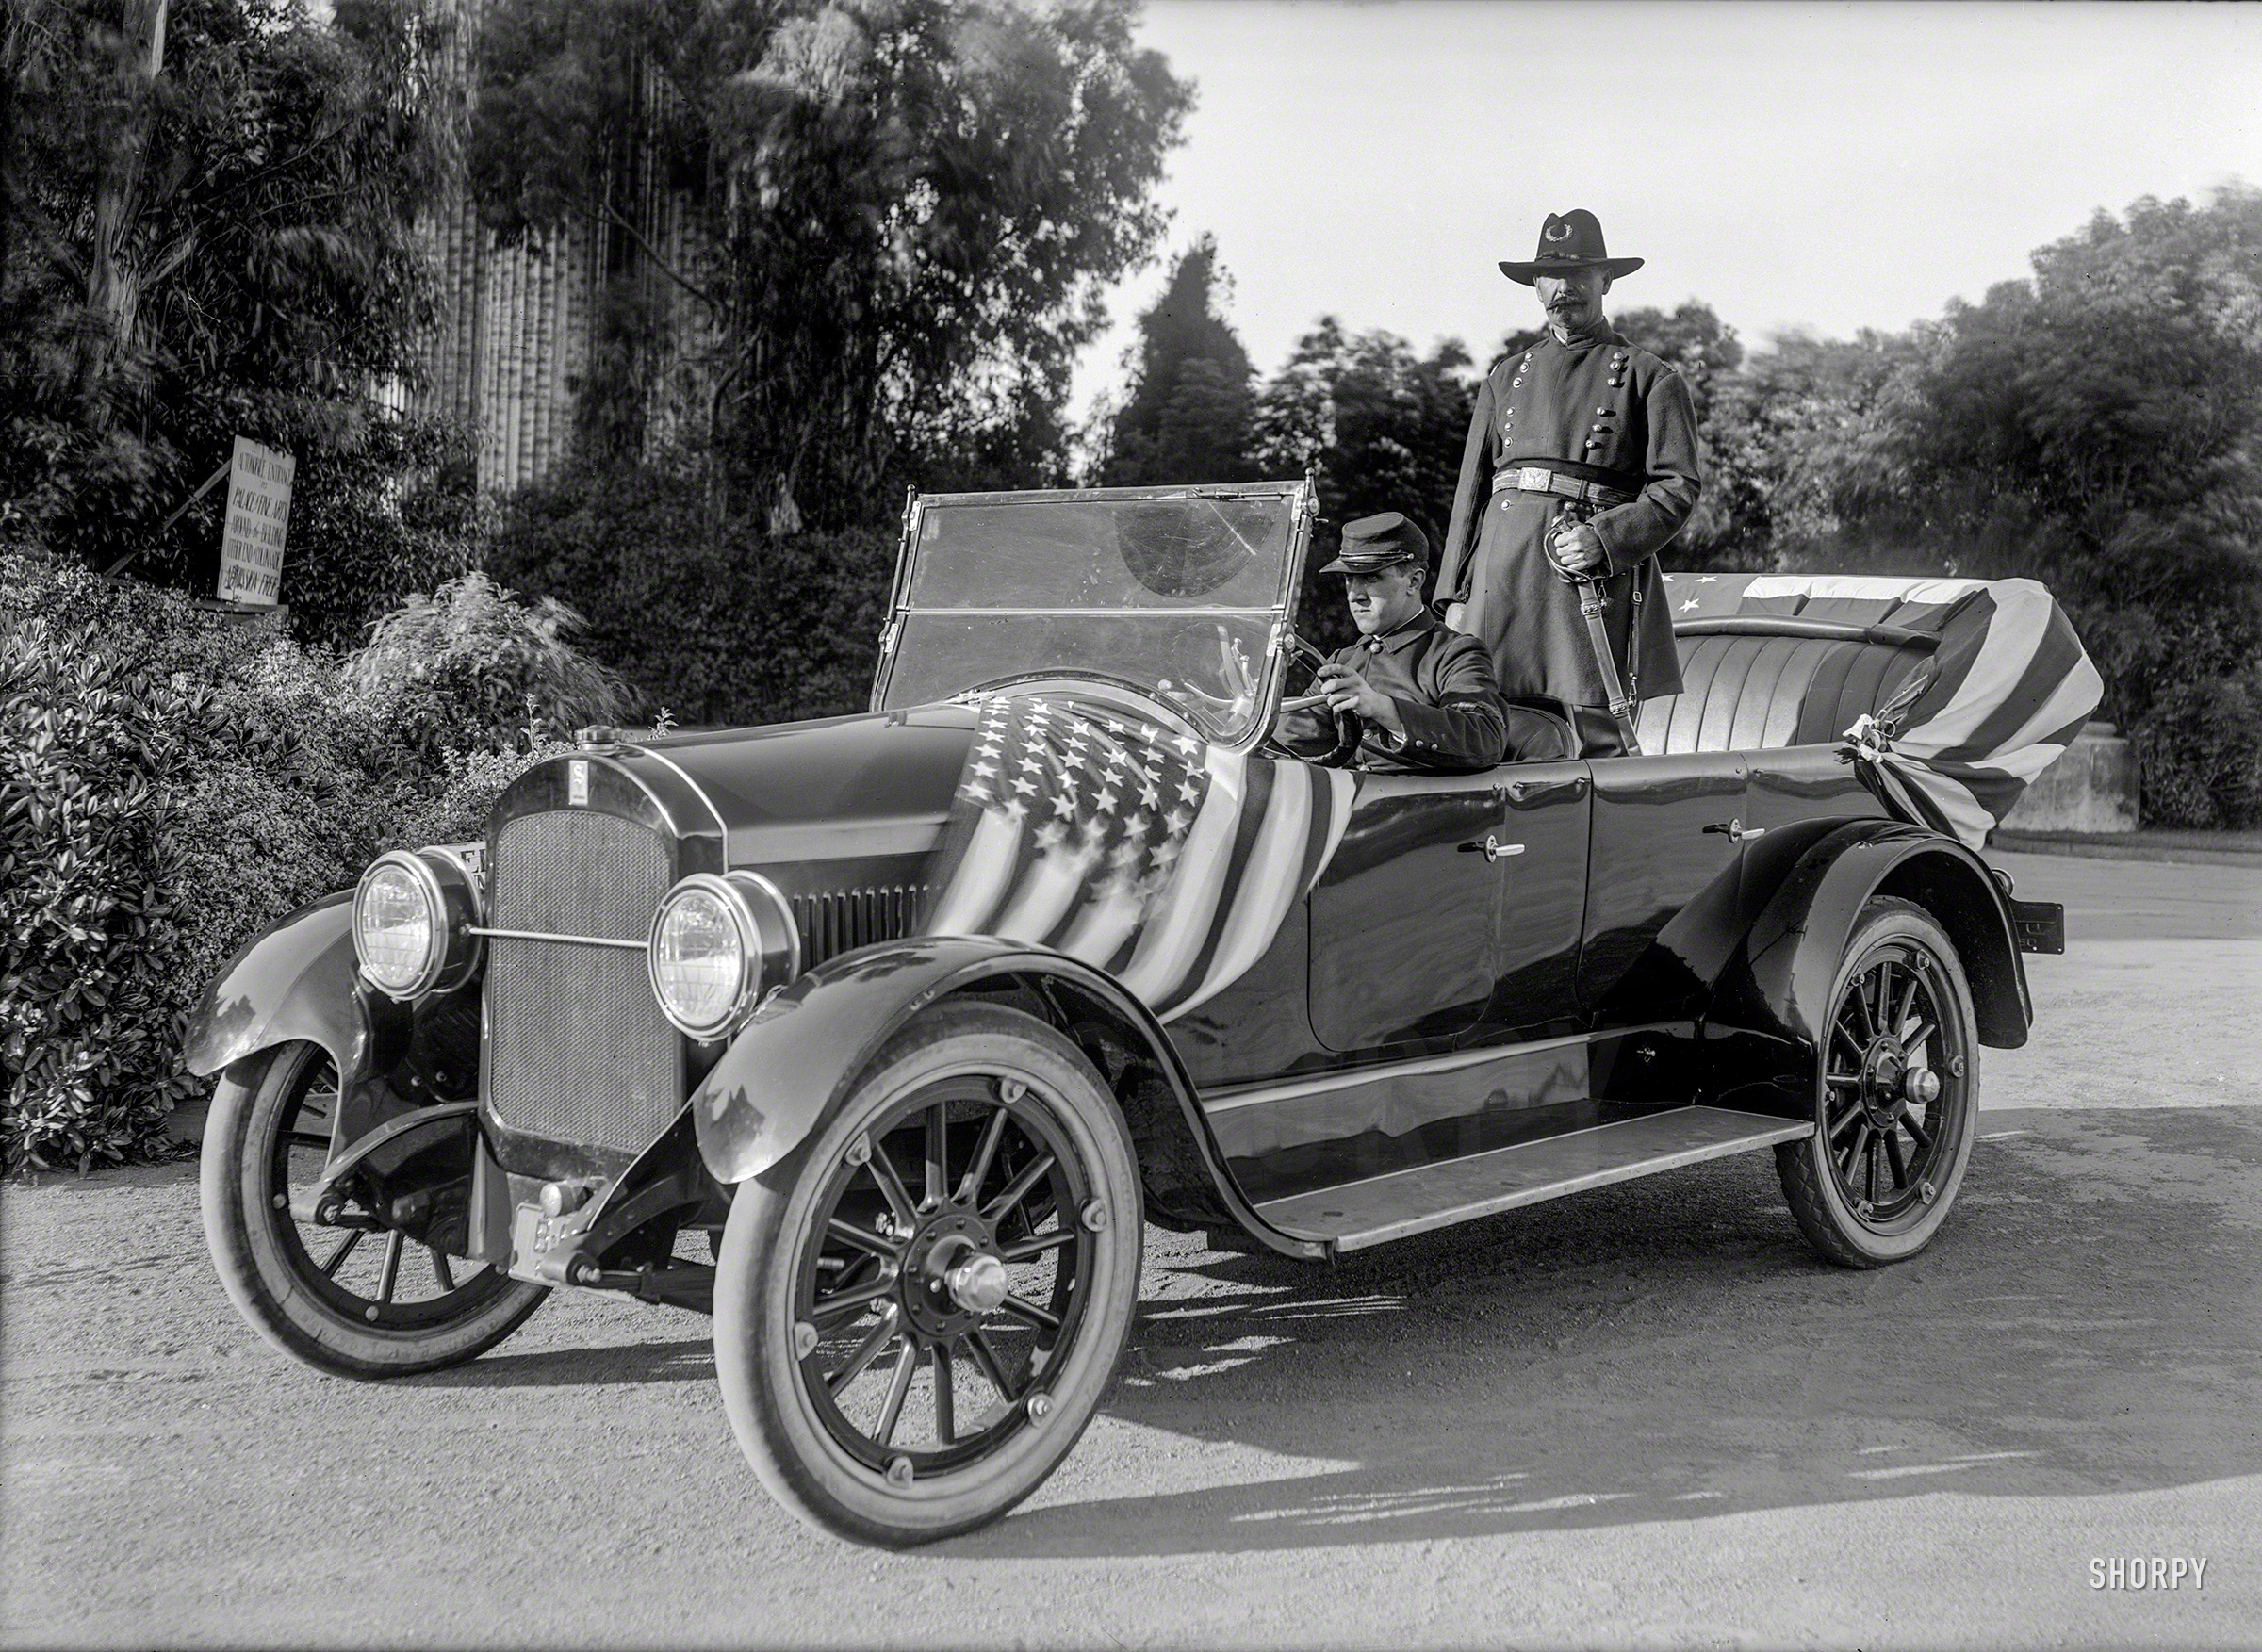 San Francisco circa 1921. "Sheridan touring car at Palace of Fine Arts." A product of the Sheridan Motor Car Co. of Muncie, Indiana, one of the more obscure entries in the Shorpy Catalog of Discontinued Conveyances. And evidently the buggy of choice for Civil War reenactors. Glass negative by Chris Helin. View full size.